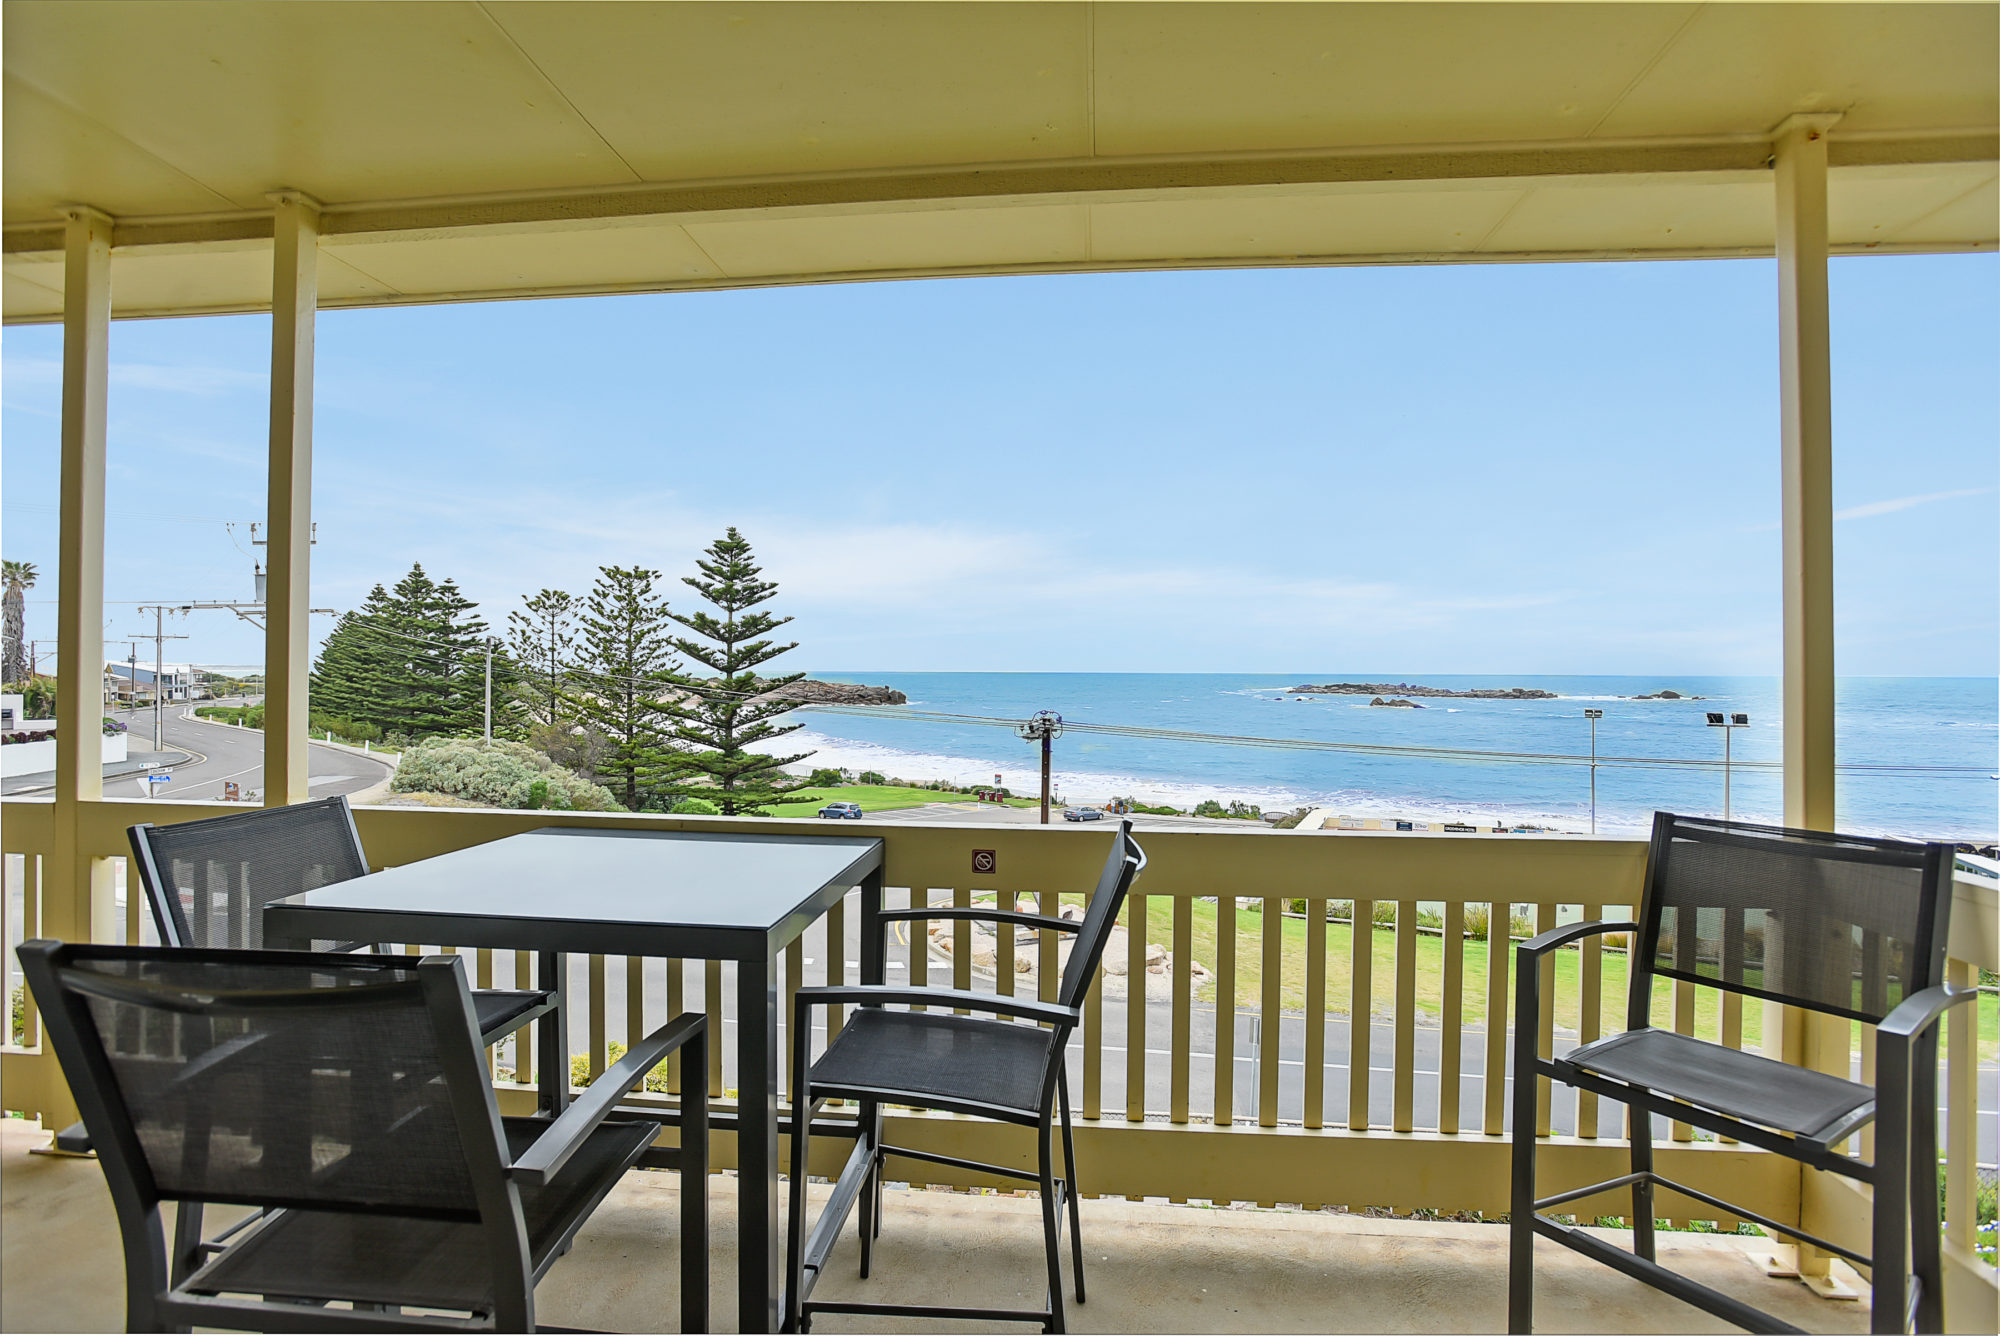 Dolphins Beachfront Apartment no 7 - 'A View To Remember' Photo